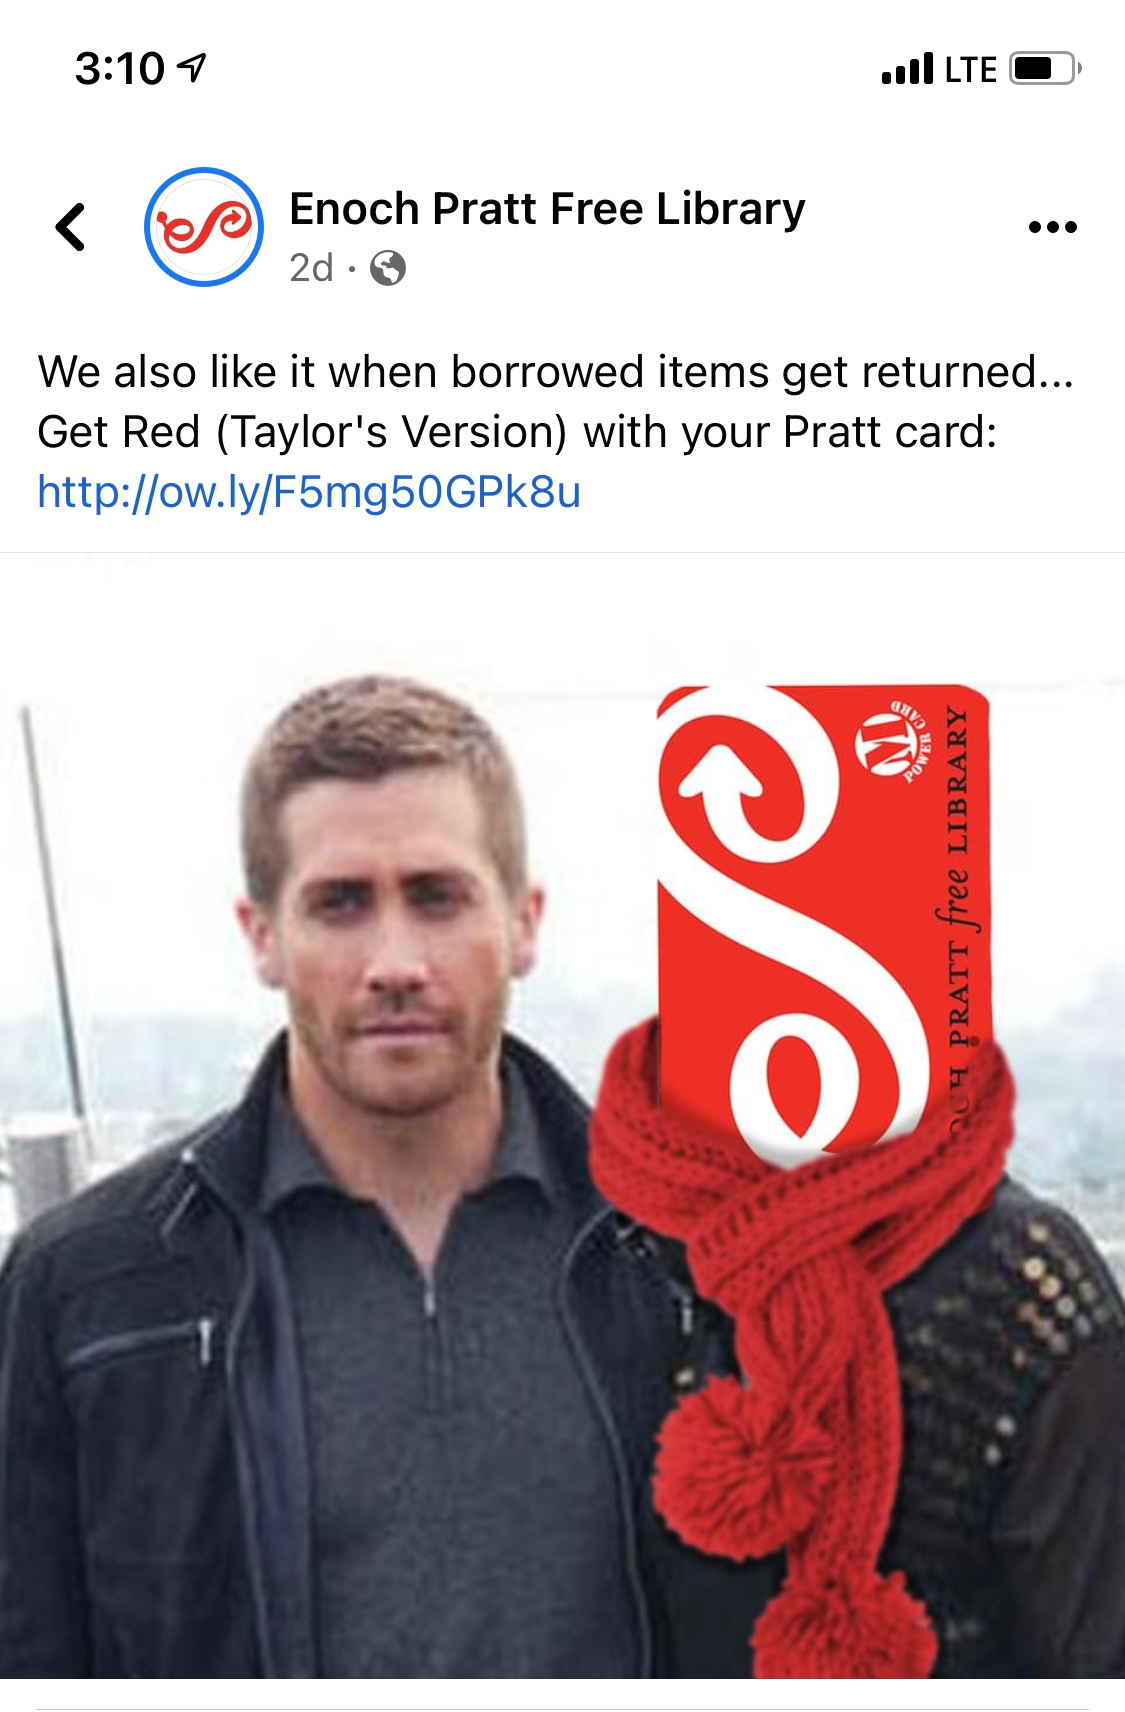 Picture of Jake G. with a woman with a library card for a face and a red scarf.  Text reads "we also like it when borrowed items get returne....Get Red (Taylor's Version) with your Pratt card:"